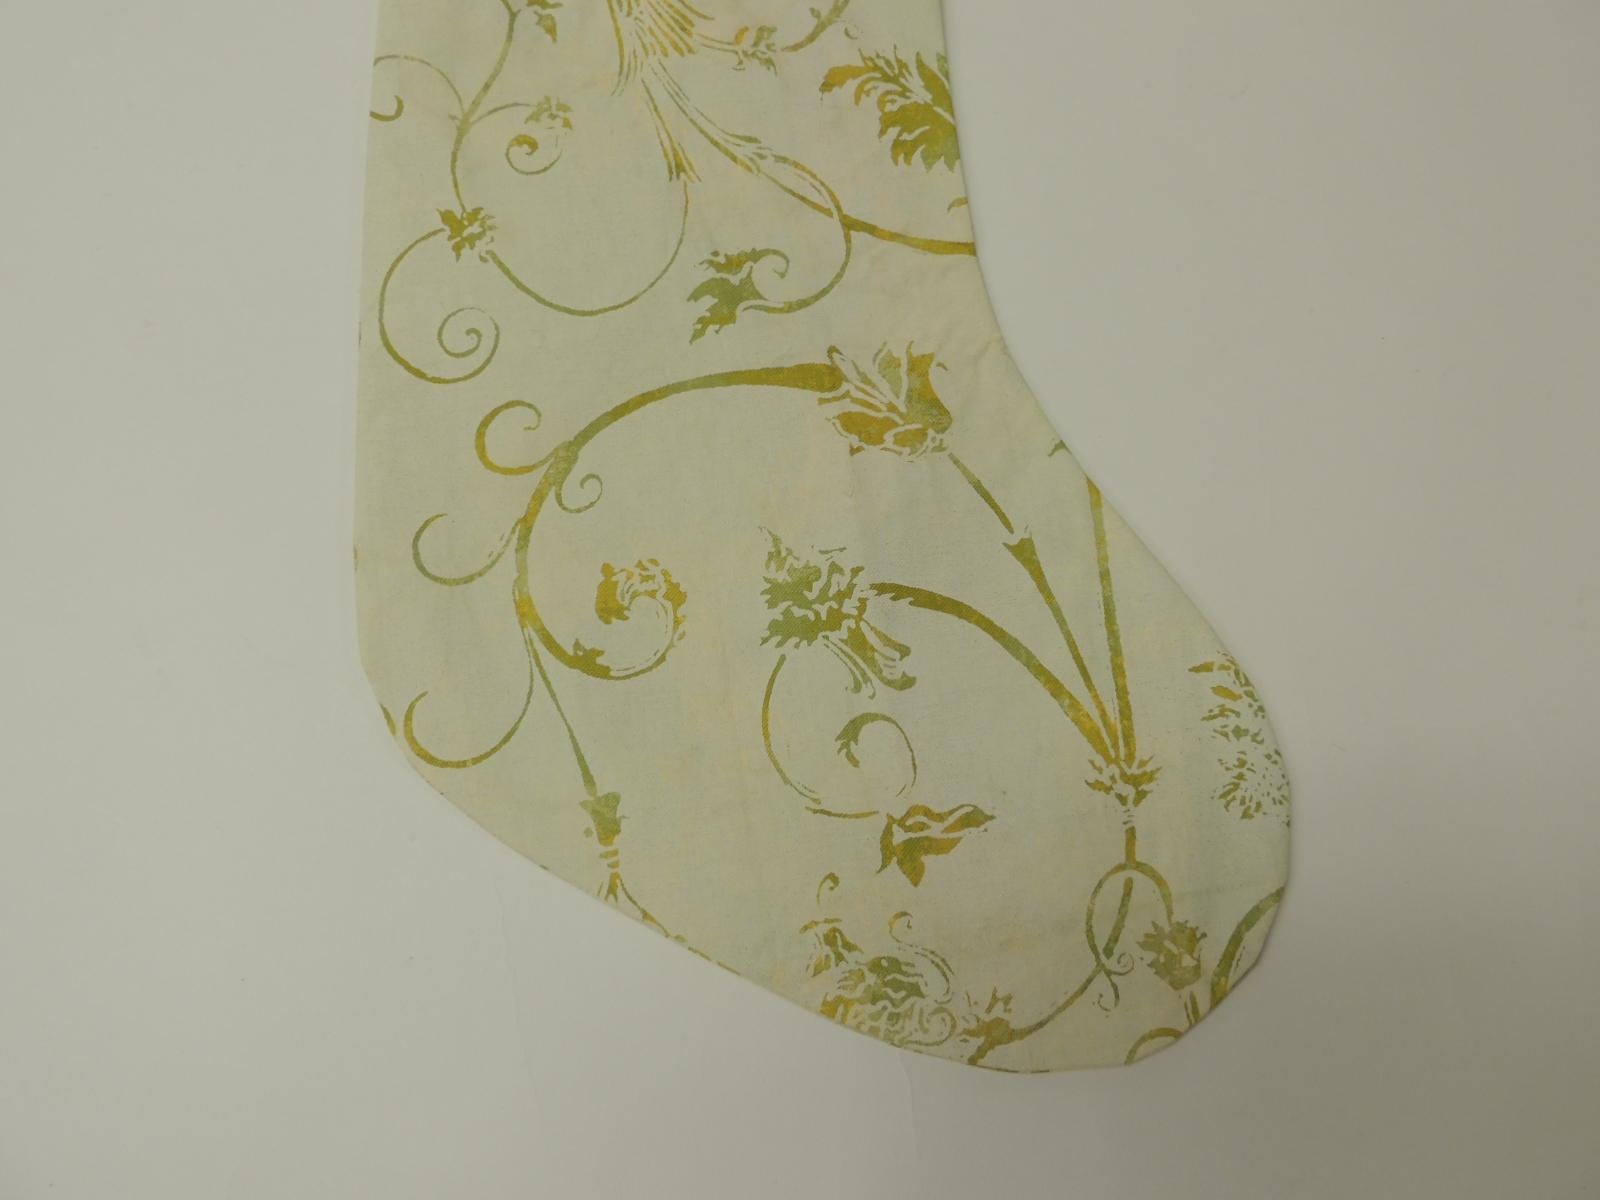 Artisanal holiday gift stocking.
Vintage Fortuny style screen printed in the USA, depicting birds of paradise and vines.
Double-sided, embellished with cotton green ribbon same as hanging hook.
Interlined with cotton fabric. 
Limited edition of